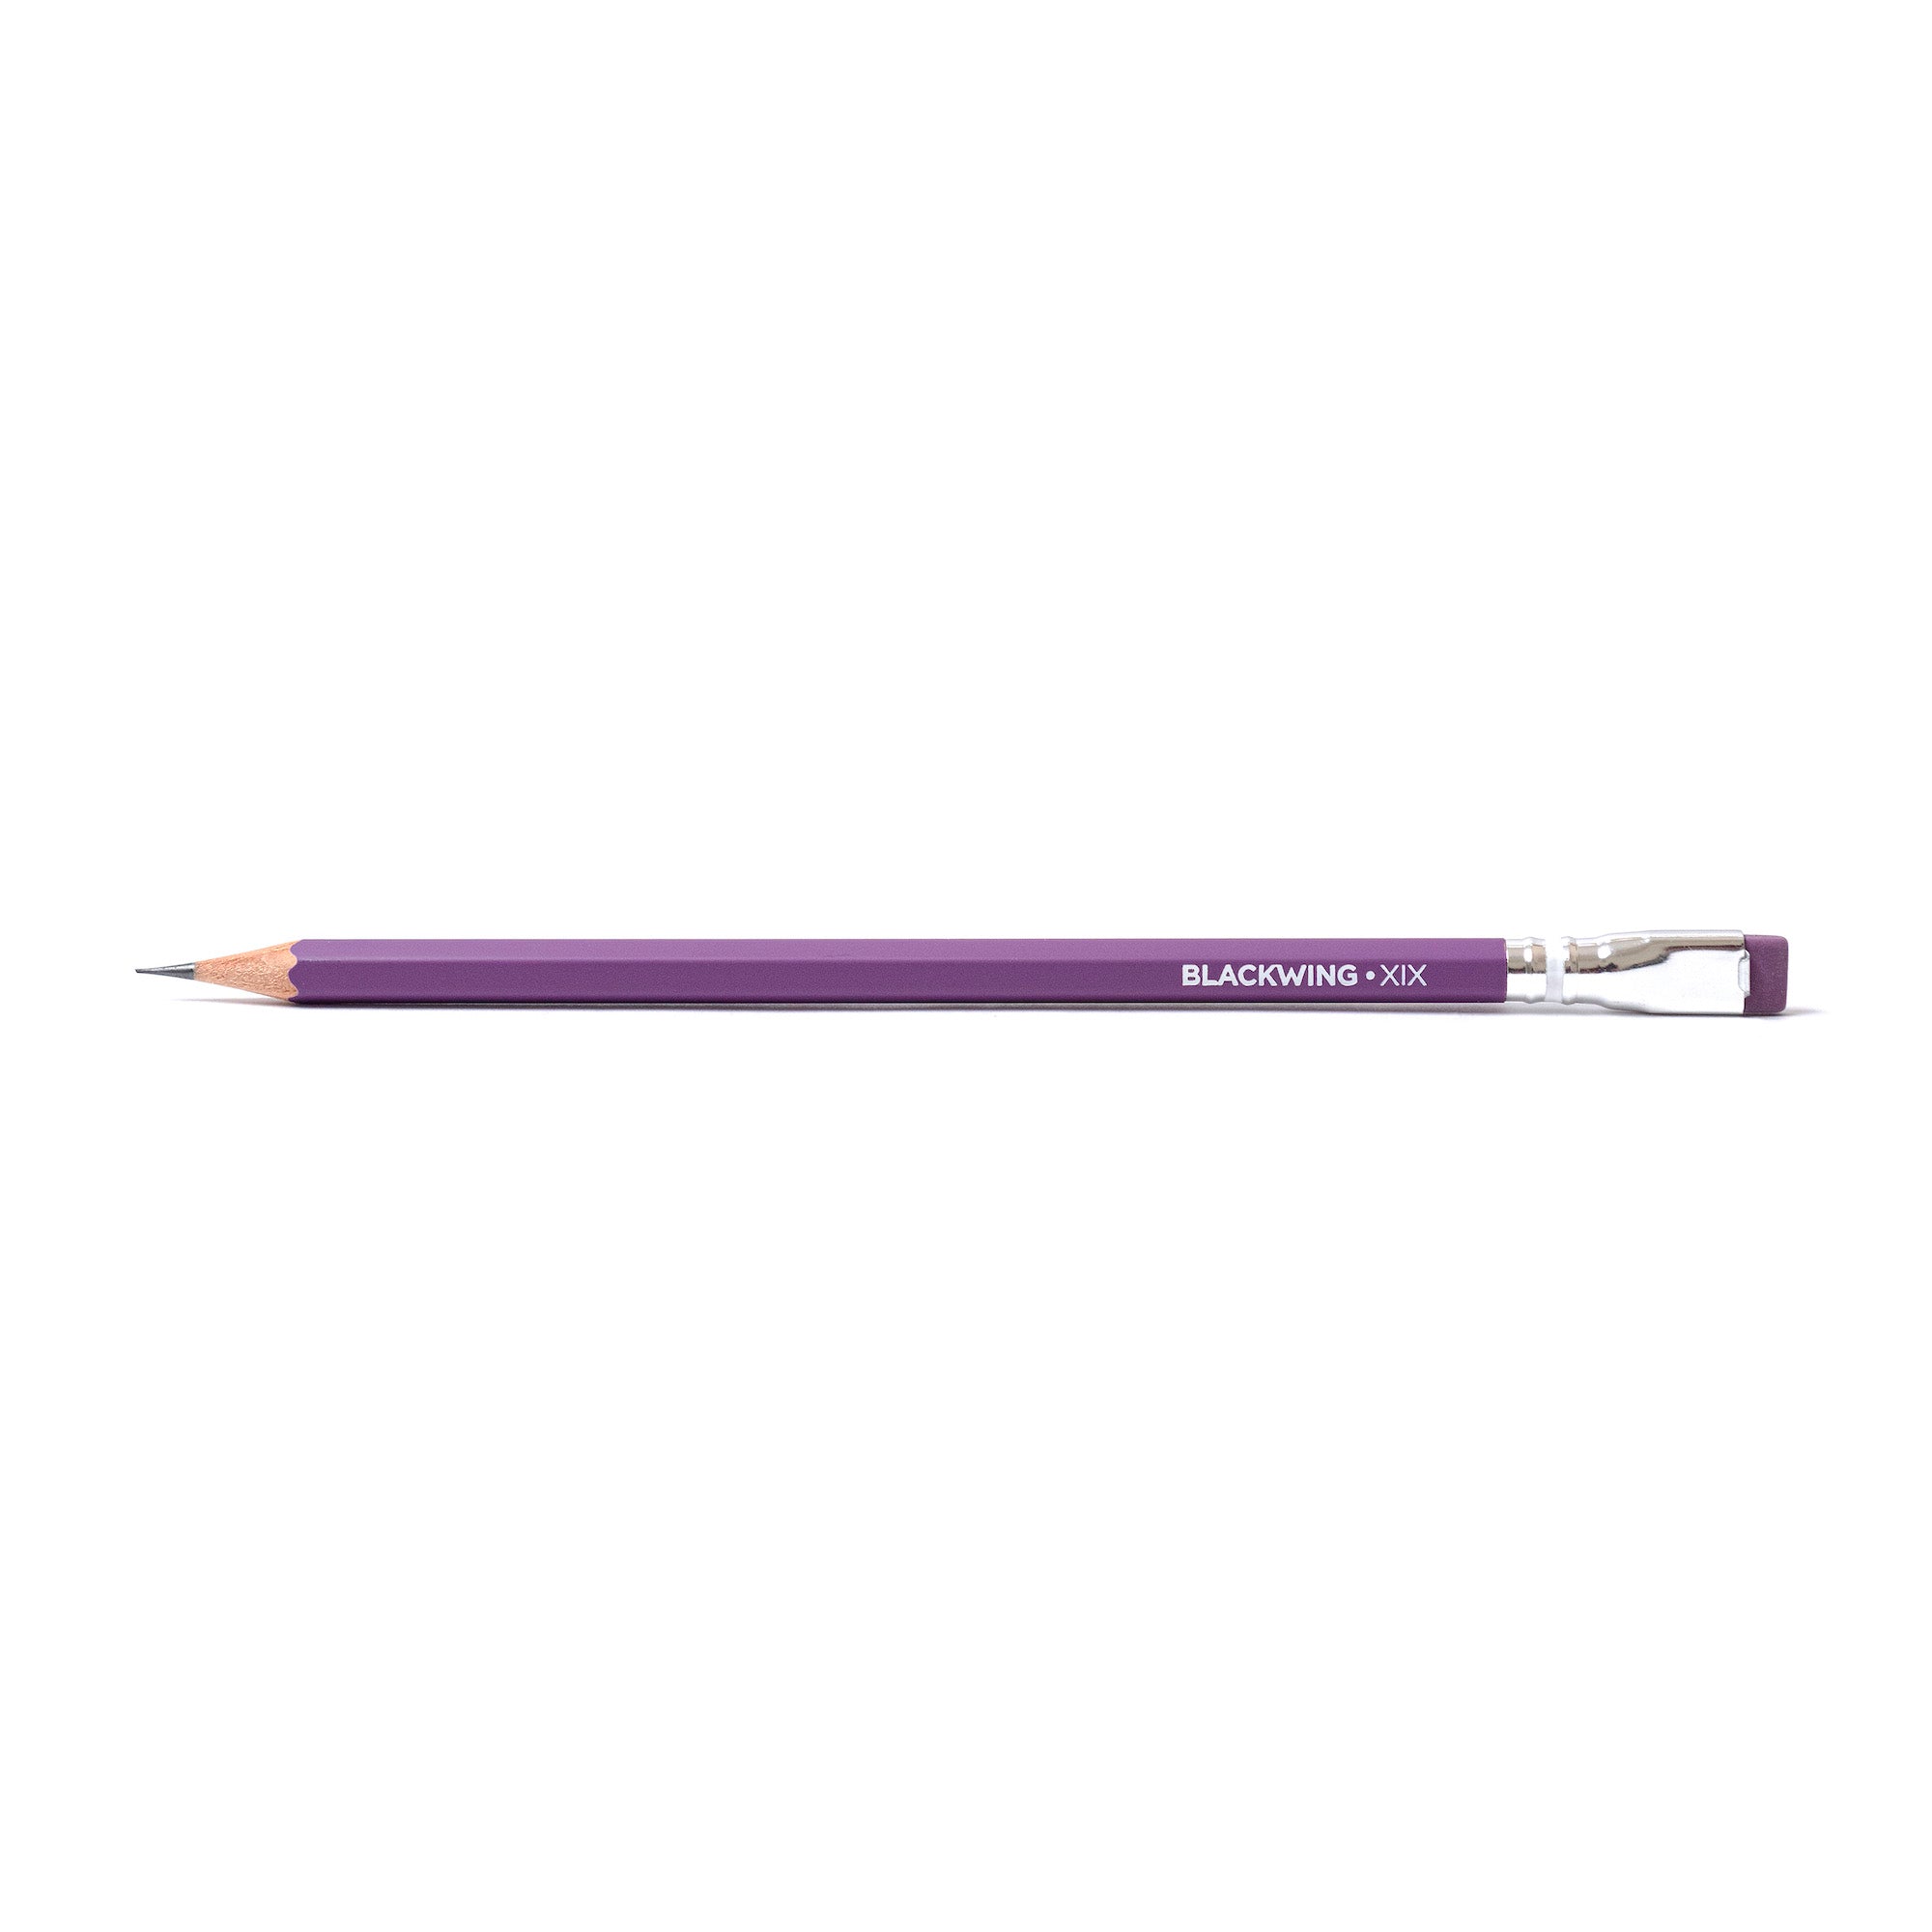 A purple pencil on a white background, Blackwing Volume XIX (Set of 12).